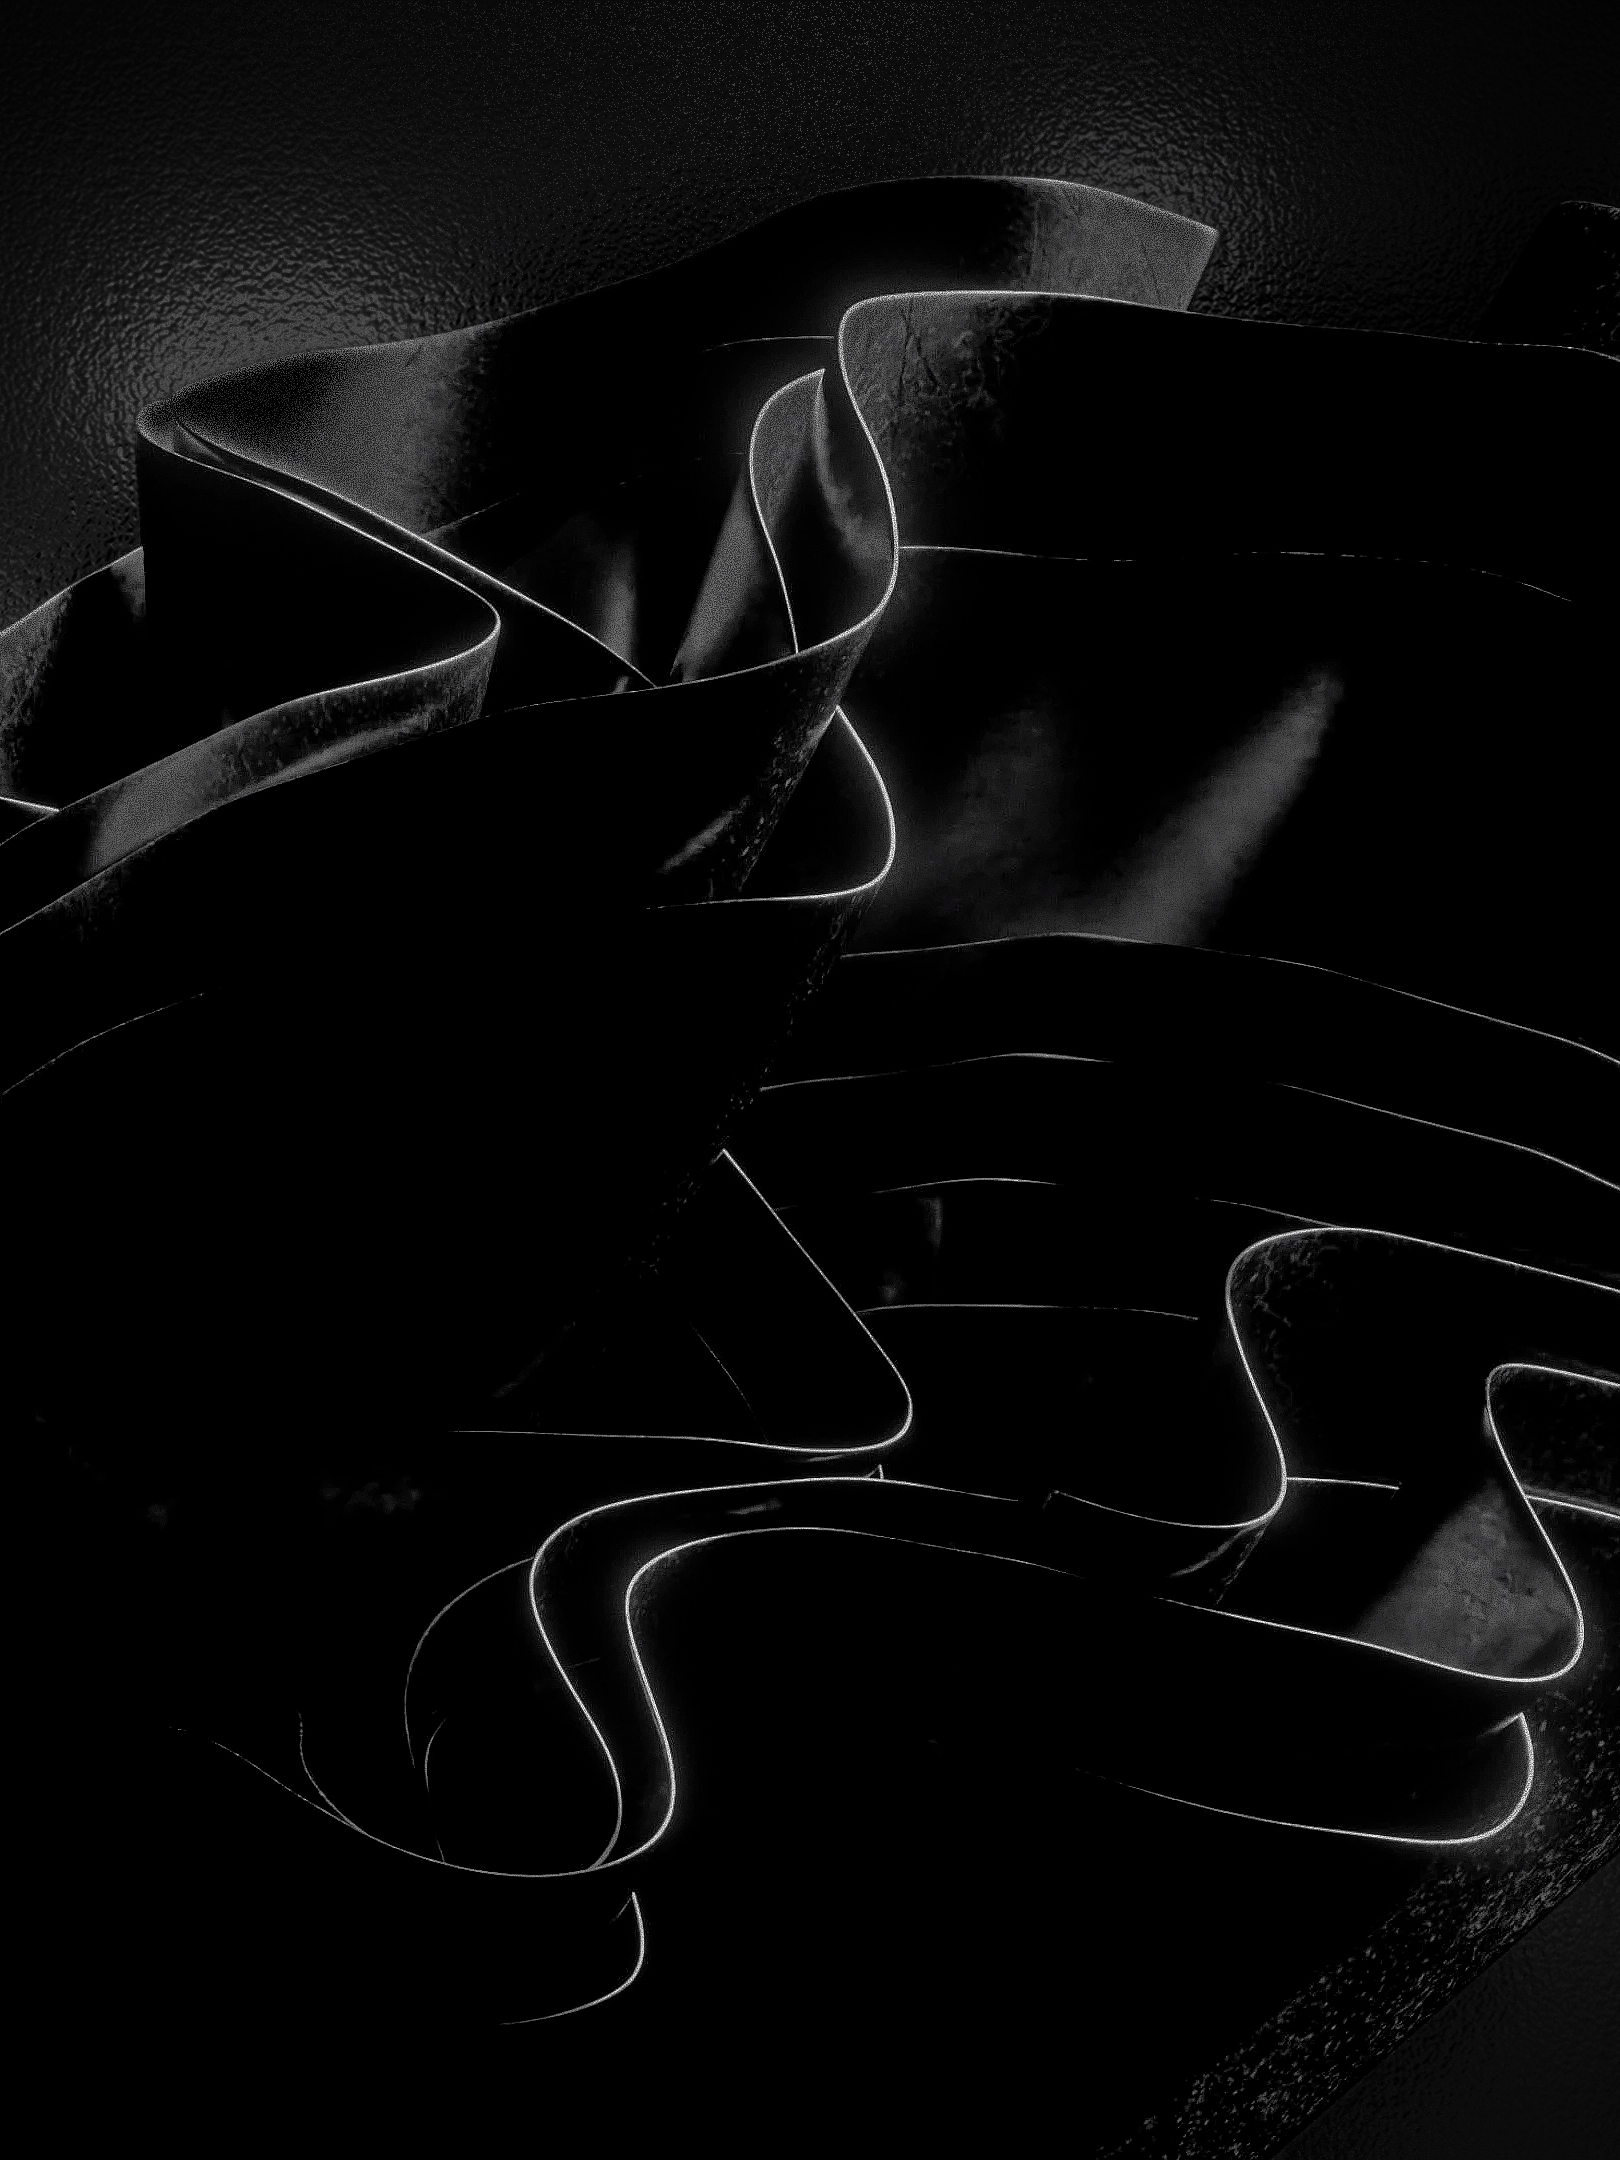 A black and white picture of some fabric - Smoke